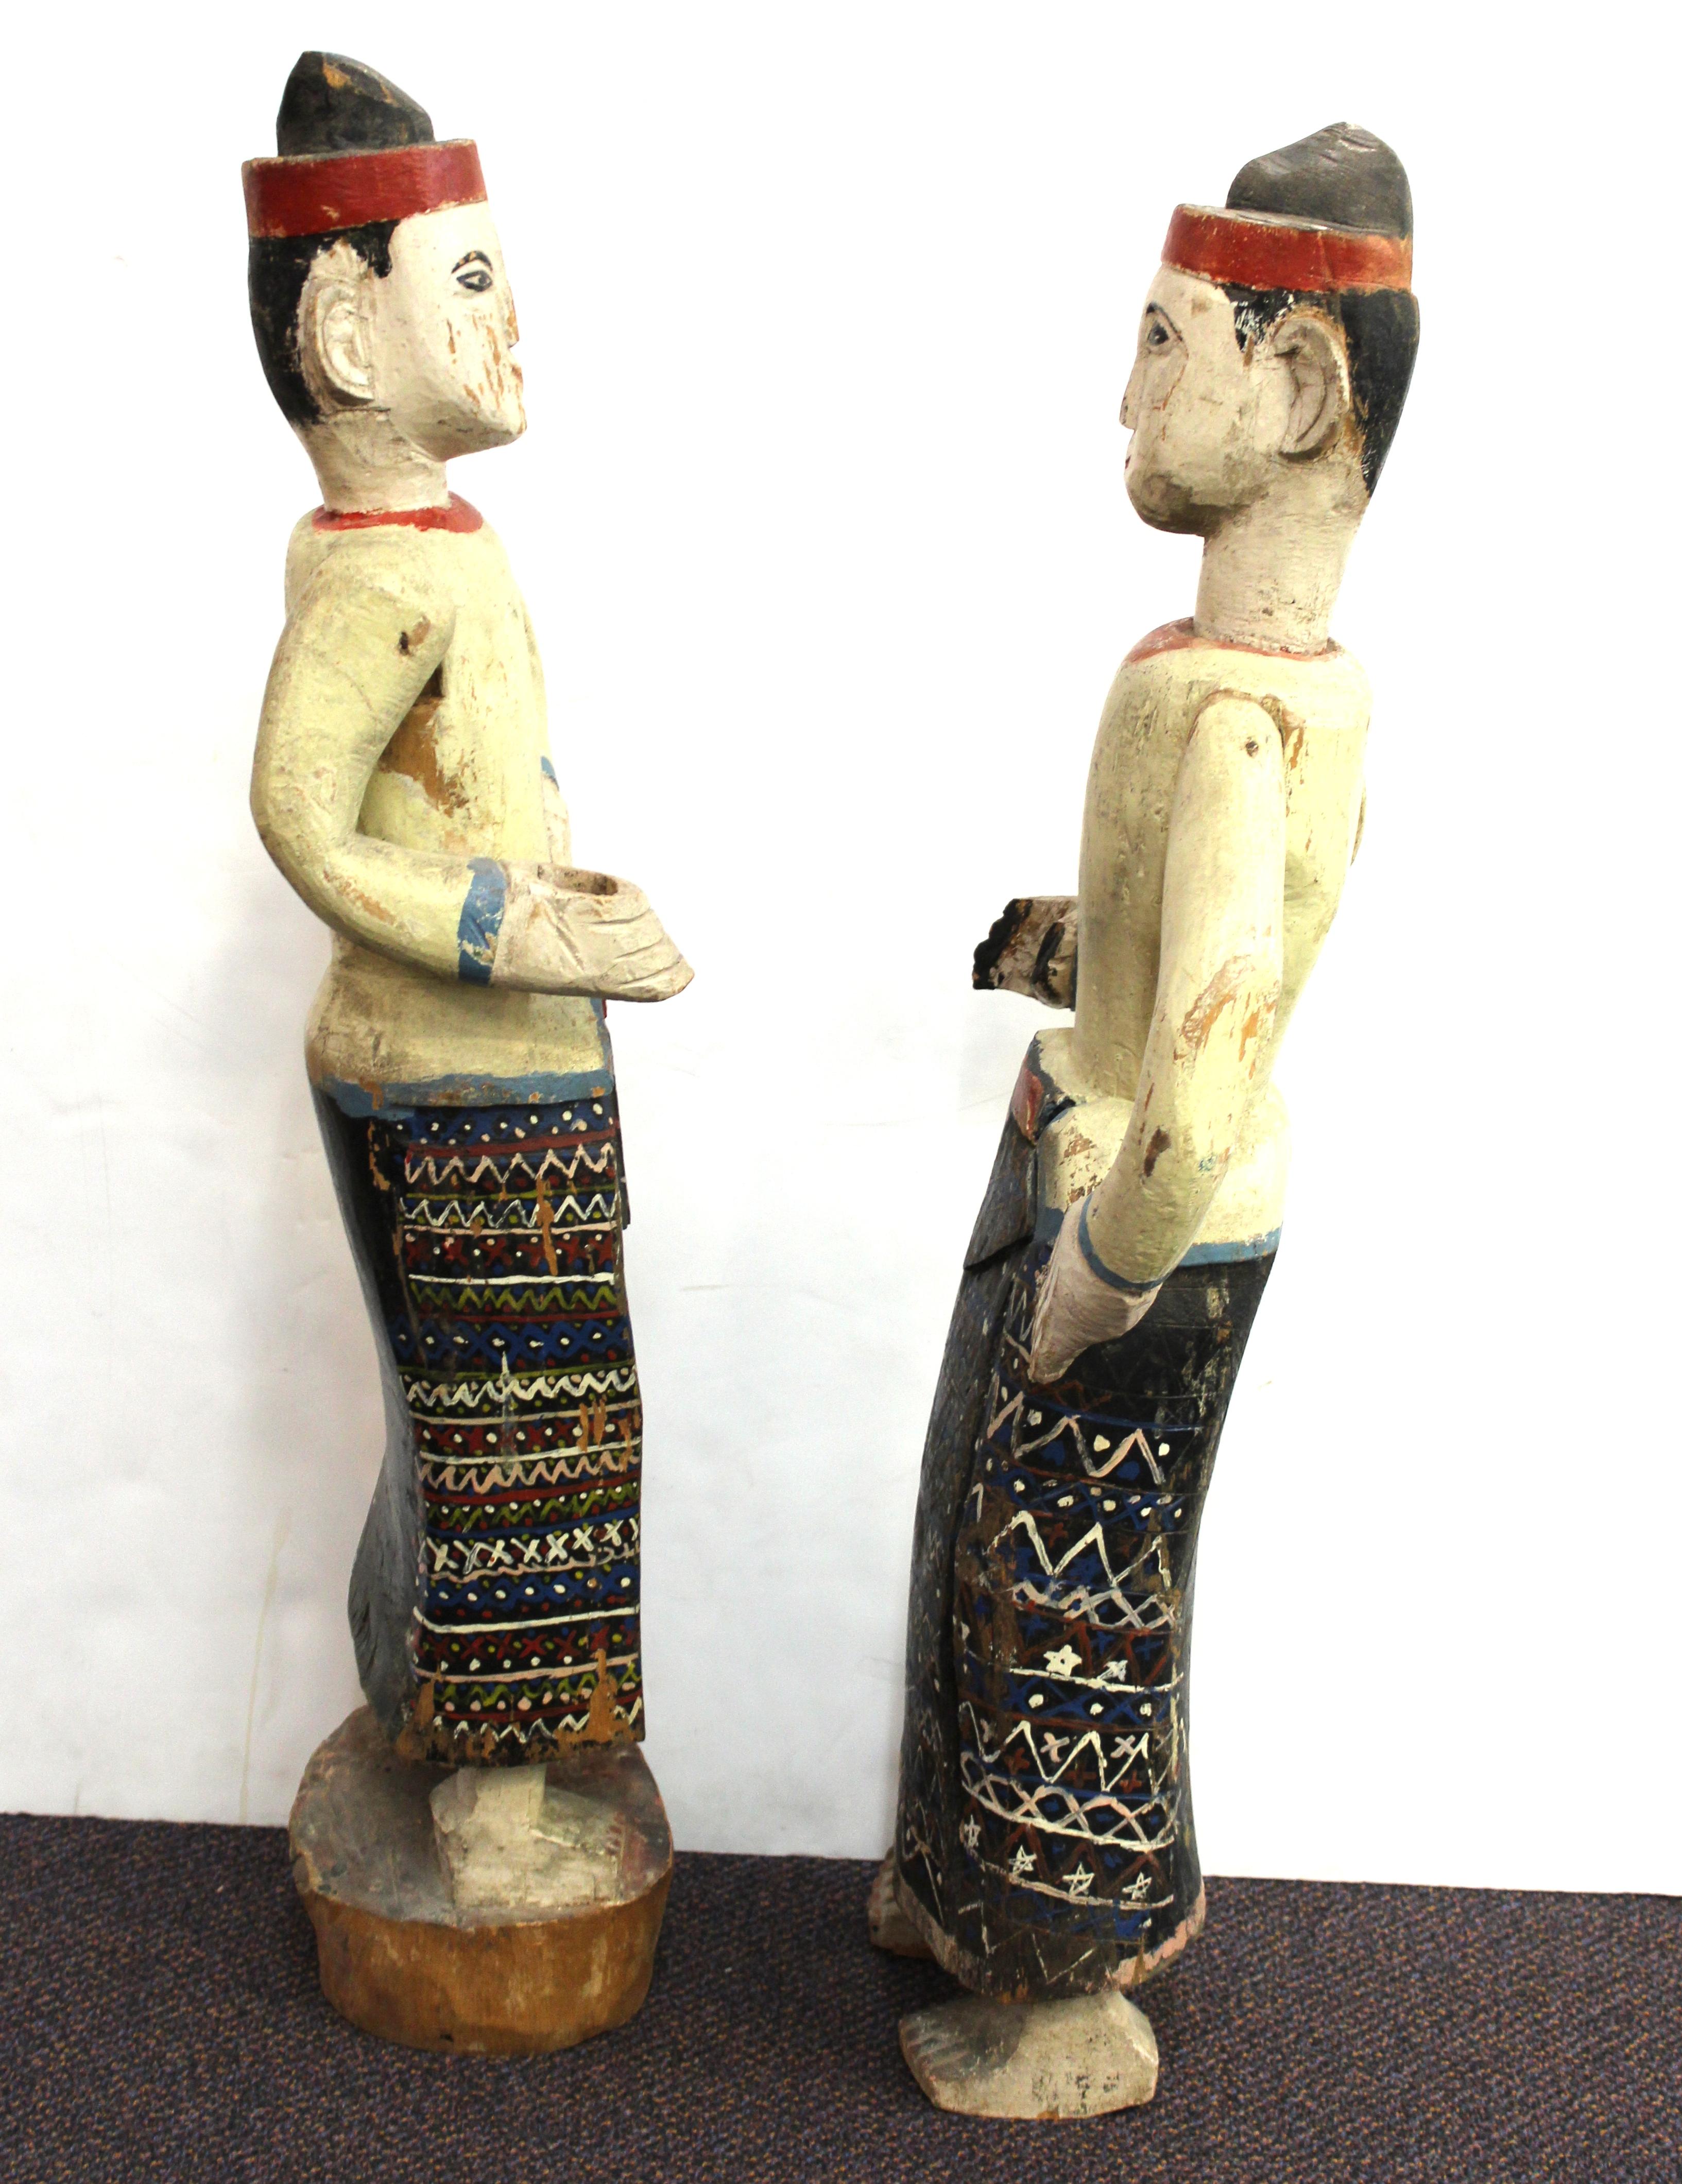 Hand-Painted South-East Asian Carved and Painted Wood Figures of Men in Sarongs